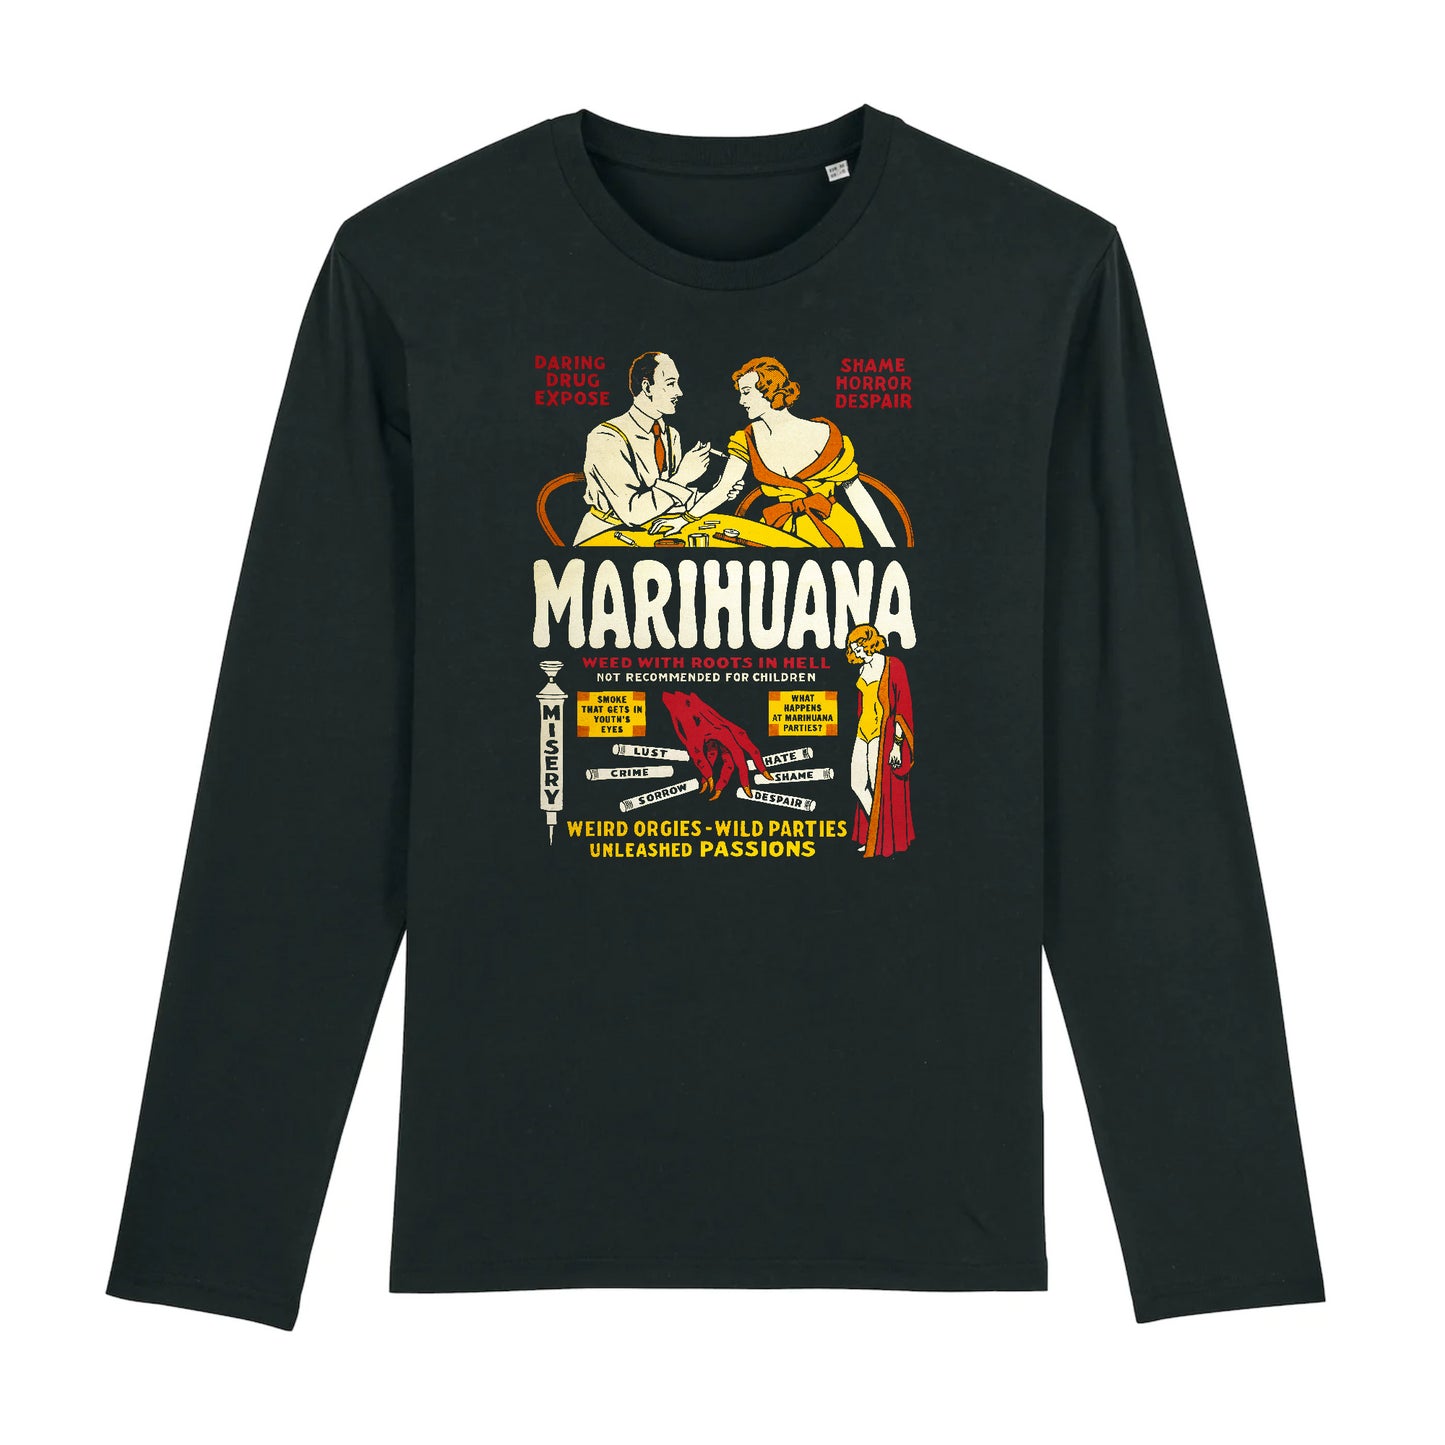 Marihuana, Weed With Roots In Hell Roadshow Attractions, 1935 - Long-Sleeve T Shirt